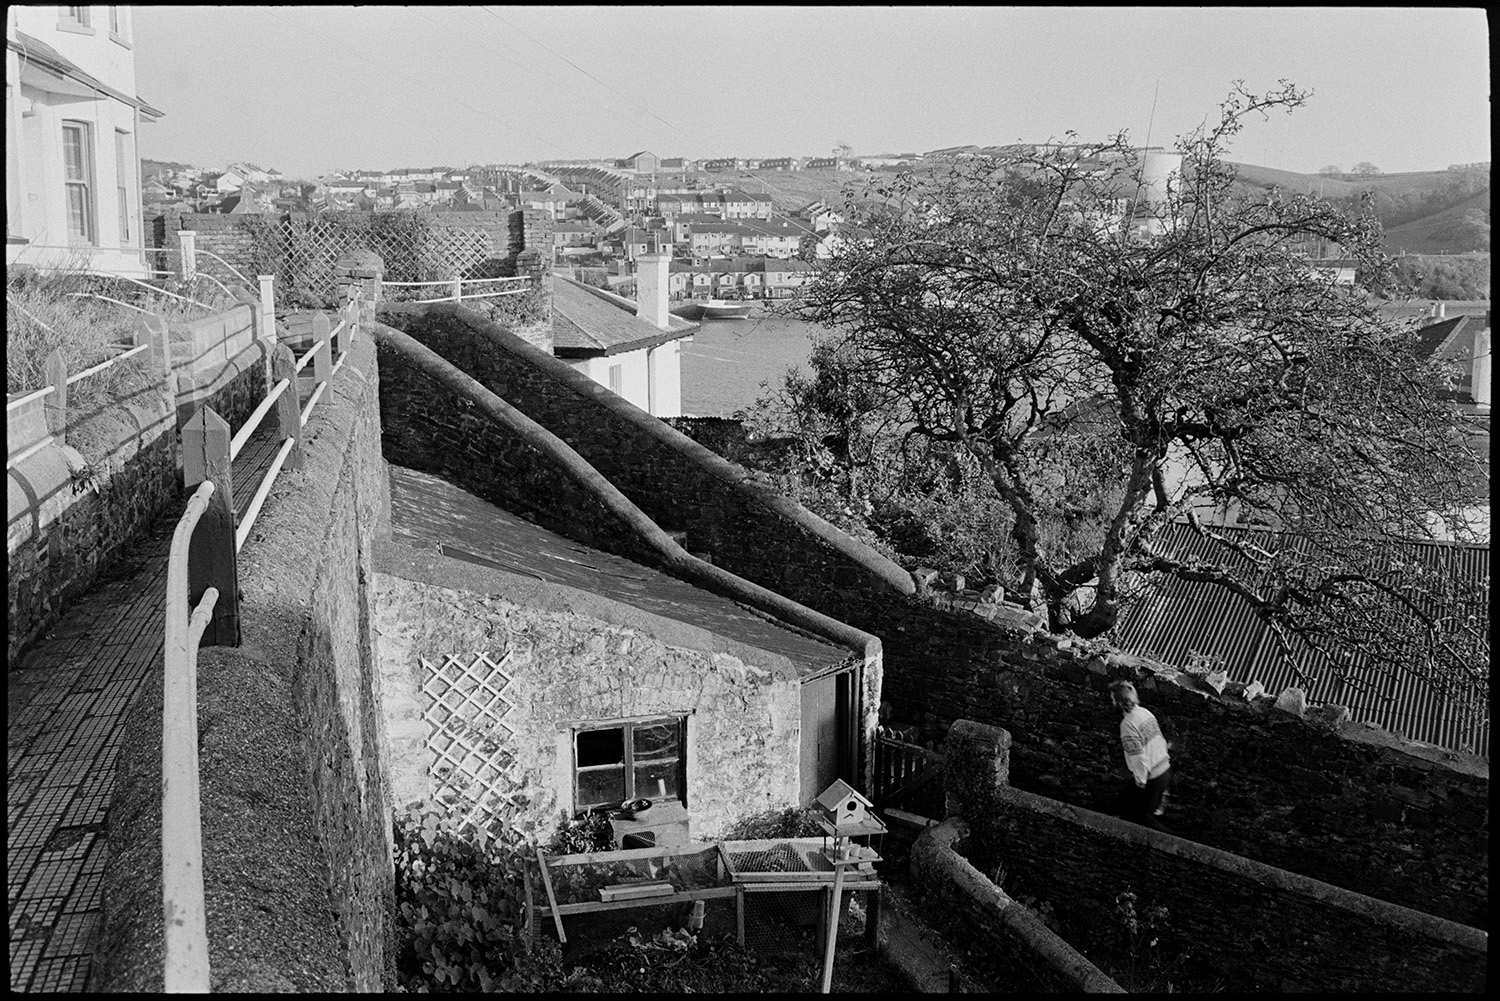 View over town with walled footpaths and tree. 
[A man walking up a walled footpath past a garden in Bideford. A tree and view over the town can be seen in the background.]